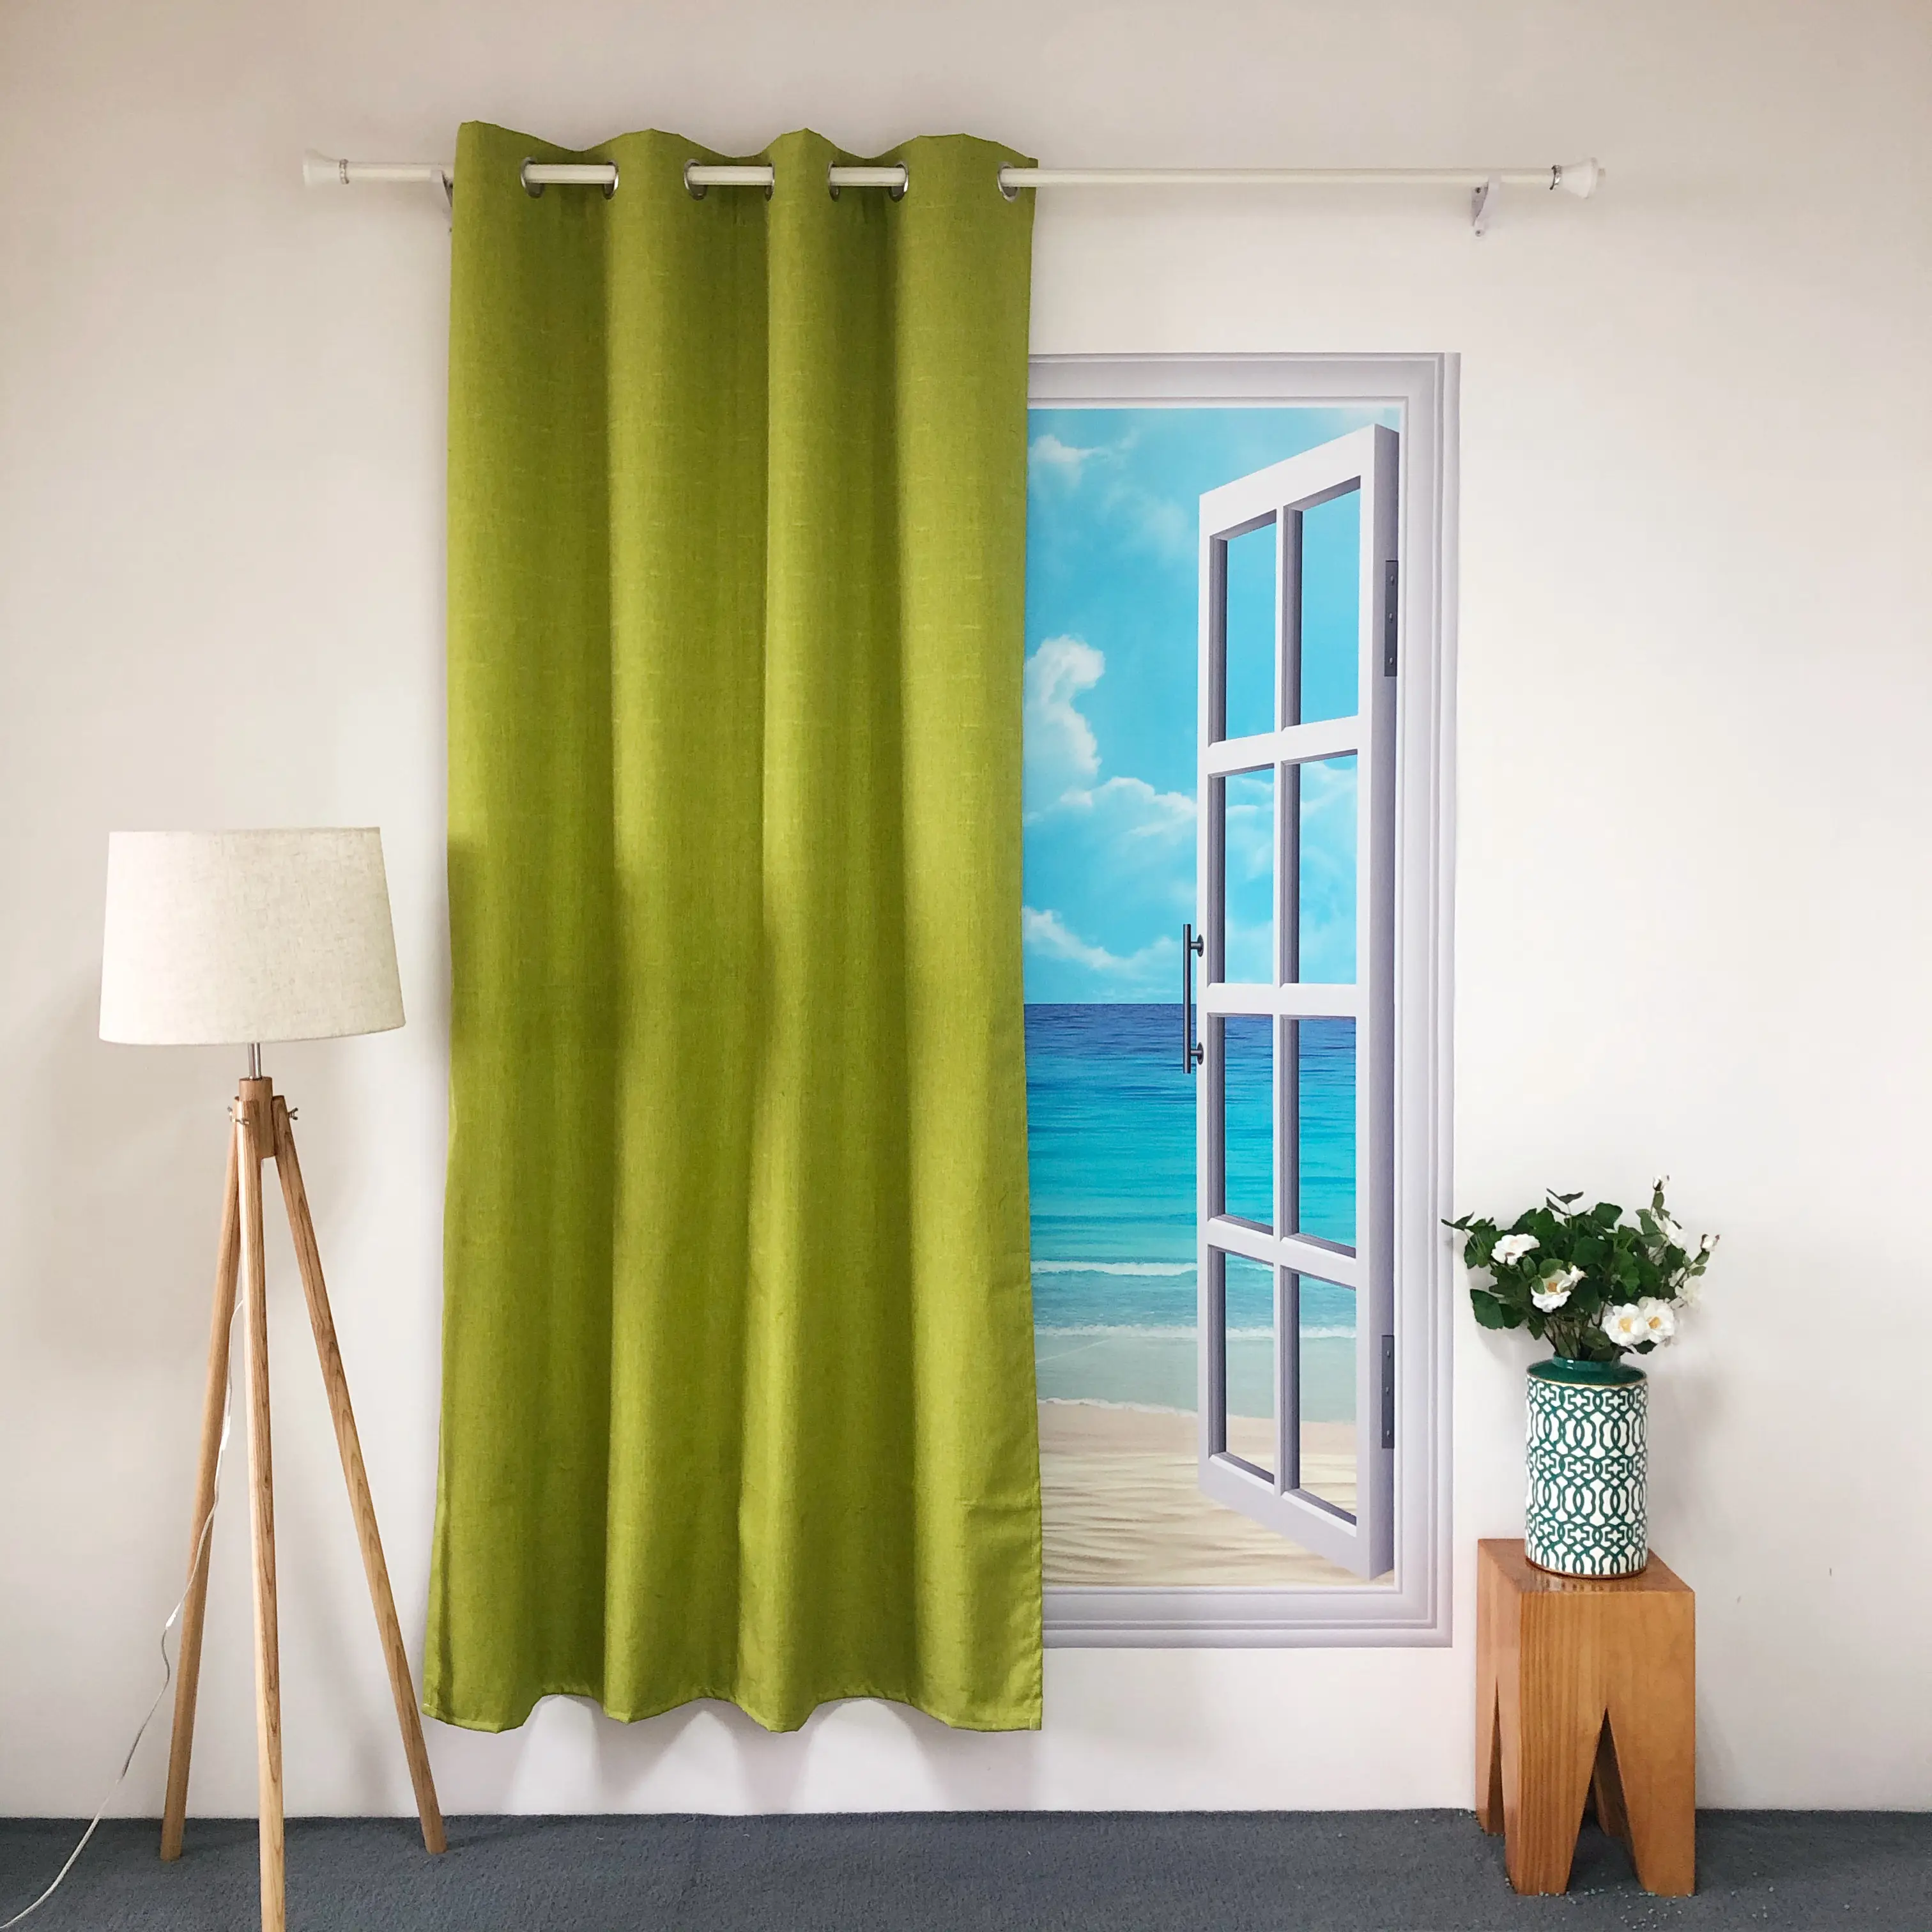 KEQIAO CHINA BK-8 YELLOW GREEN NICE SIMPLE POLYESTER DESIGN POLYESTER PLAIN VOILE DOLLY BLACKOUT SHEER PANEL CURTAIN GOOD PRICE